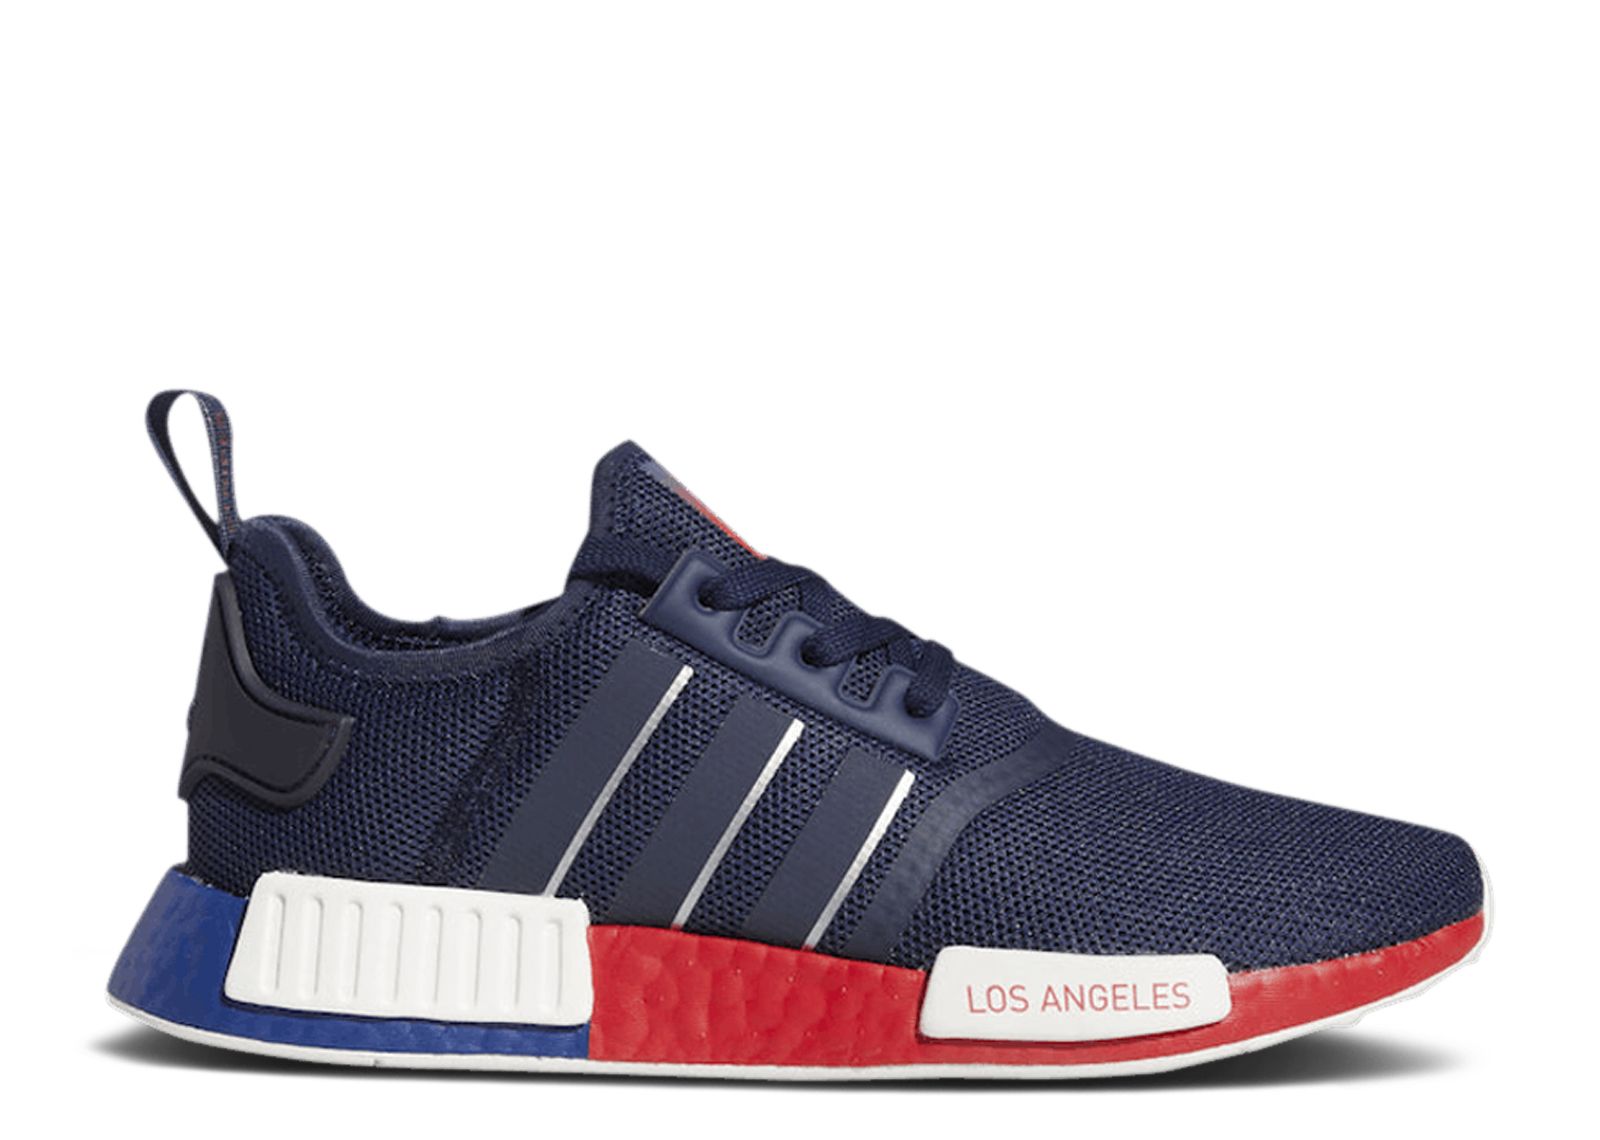 Кроссовки adidas Nmd_R1 'United By Sneakers - Los Angeles', синий children s basketball sneakers non slip boys basketball training sneakers comfortable and wear resistant girls gym sneakers